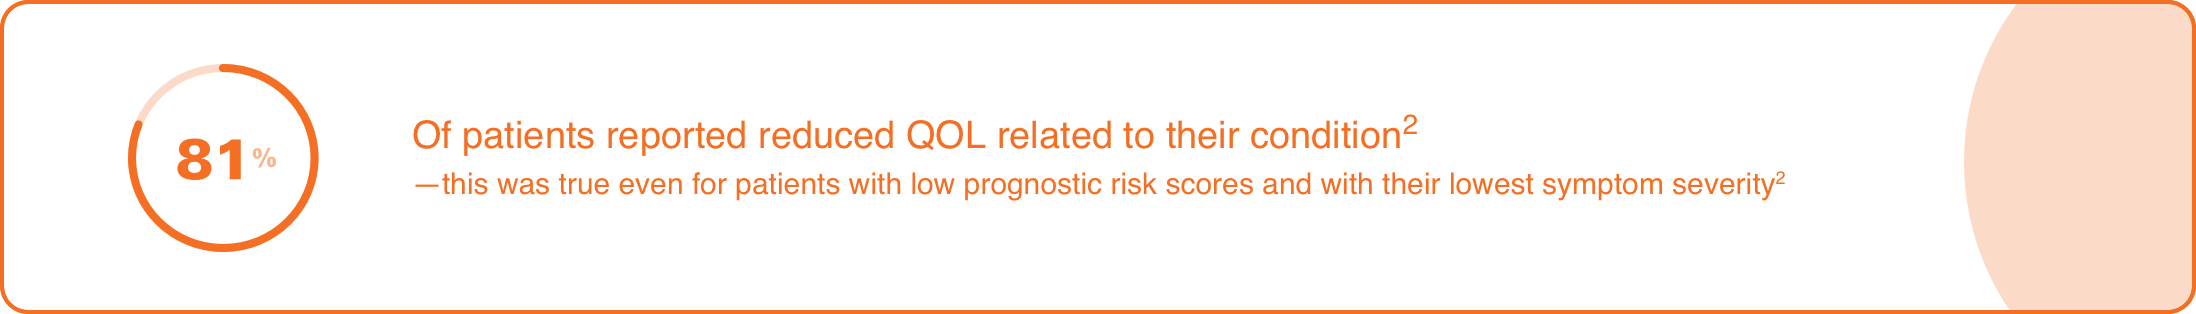 Image says 81% of patients reported reduced QOL related to their condition; this was true even for patients with low prognostic risk scores and with their lowest symptom severity